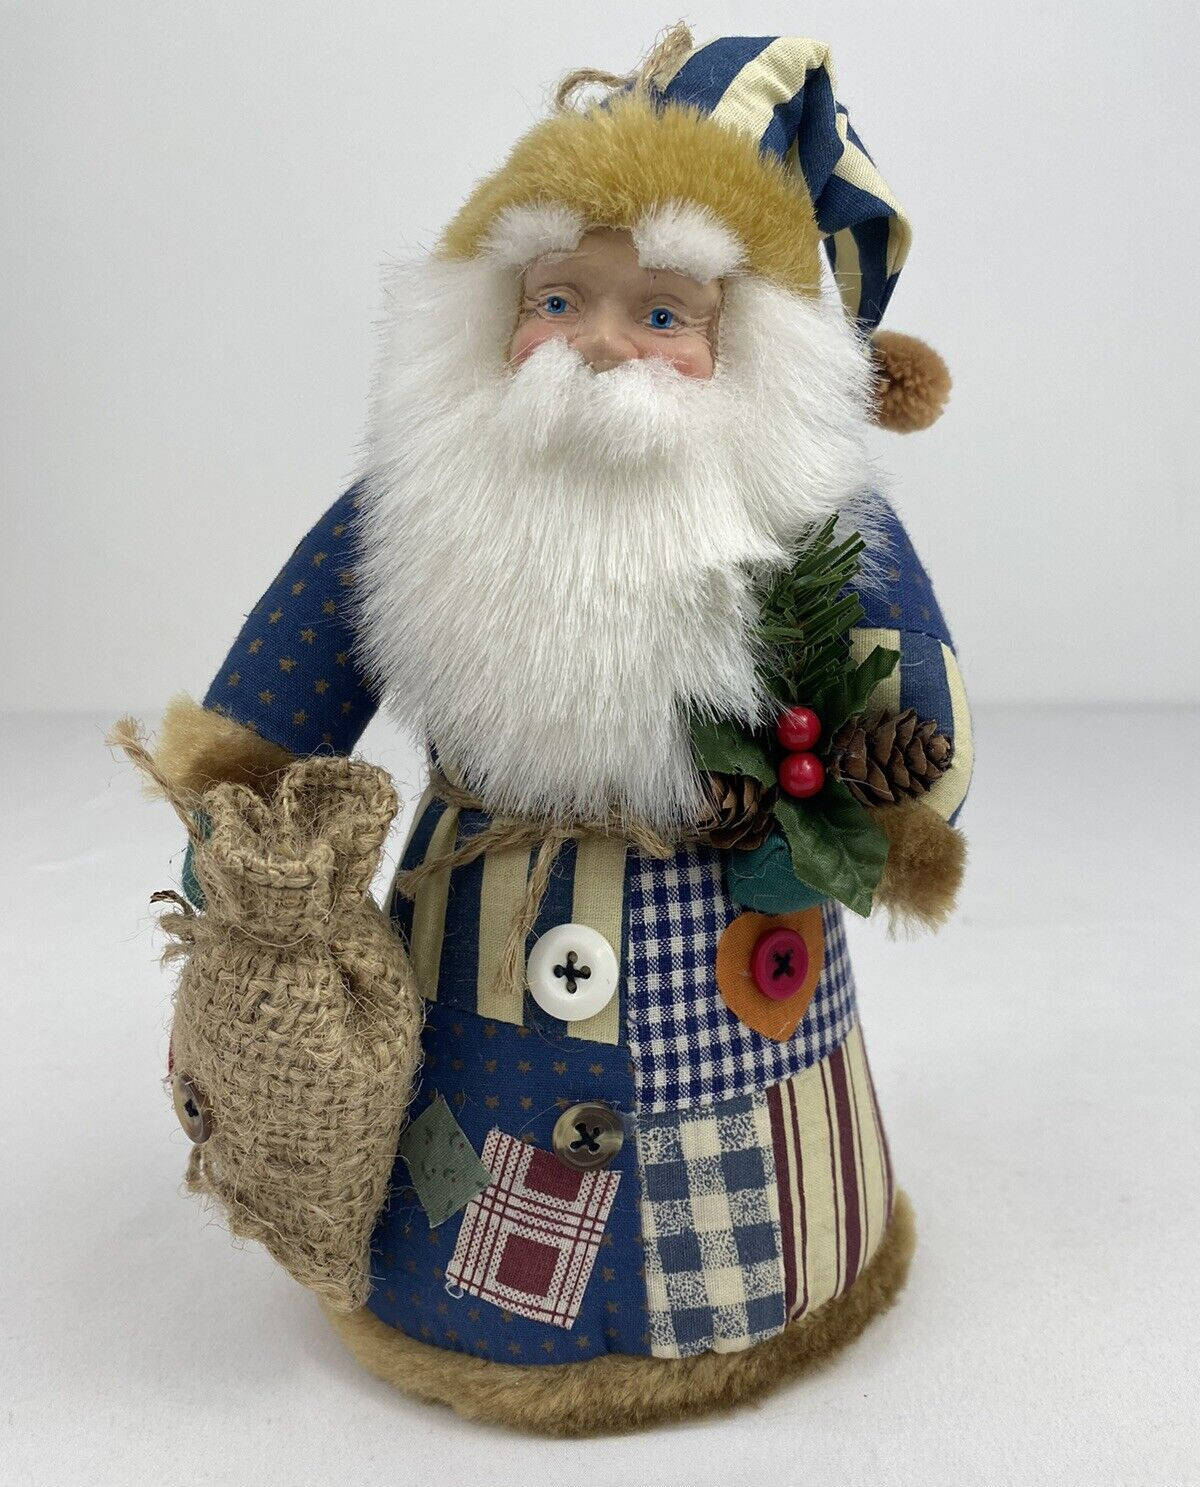 Vintage 90's Boho Santa Claus, Country Patchwork Santa, 8 1/2 in. Tall